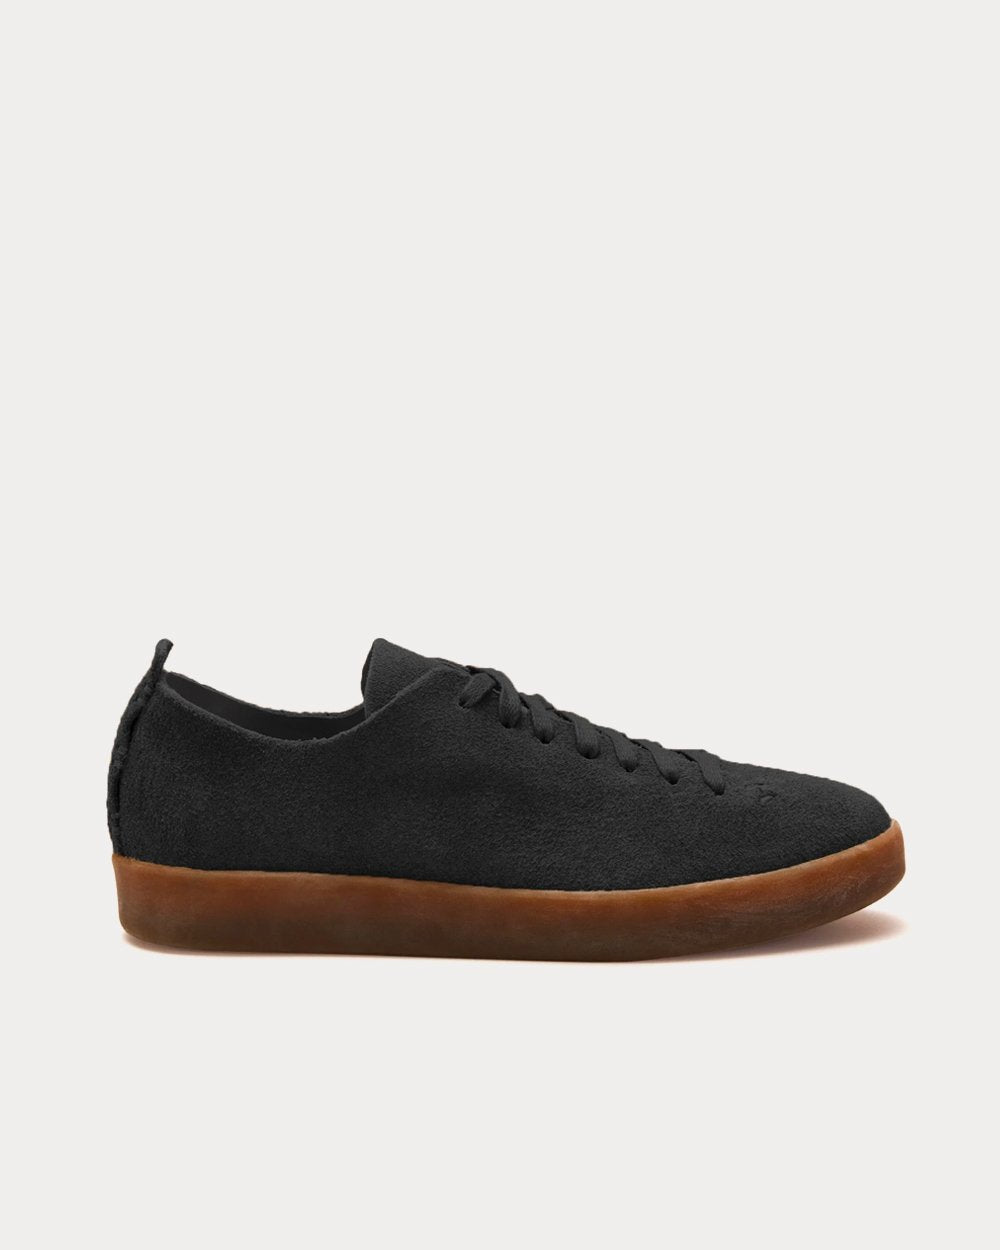 Feit - Hand Sewn Latex Suede Black Low Top Sneakers